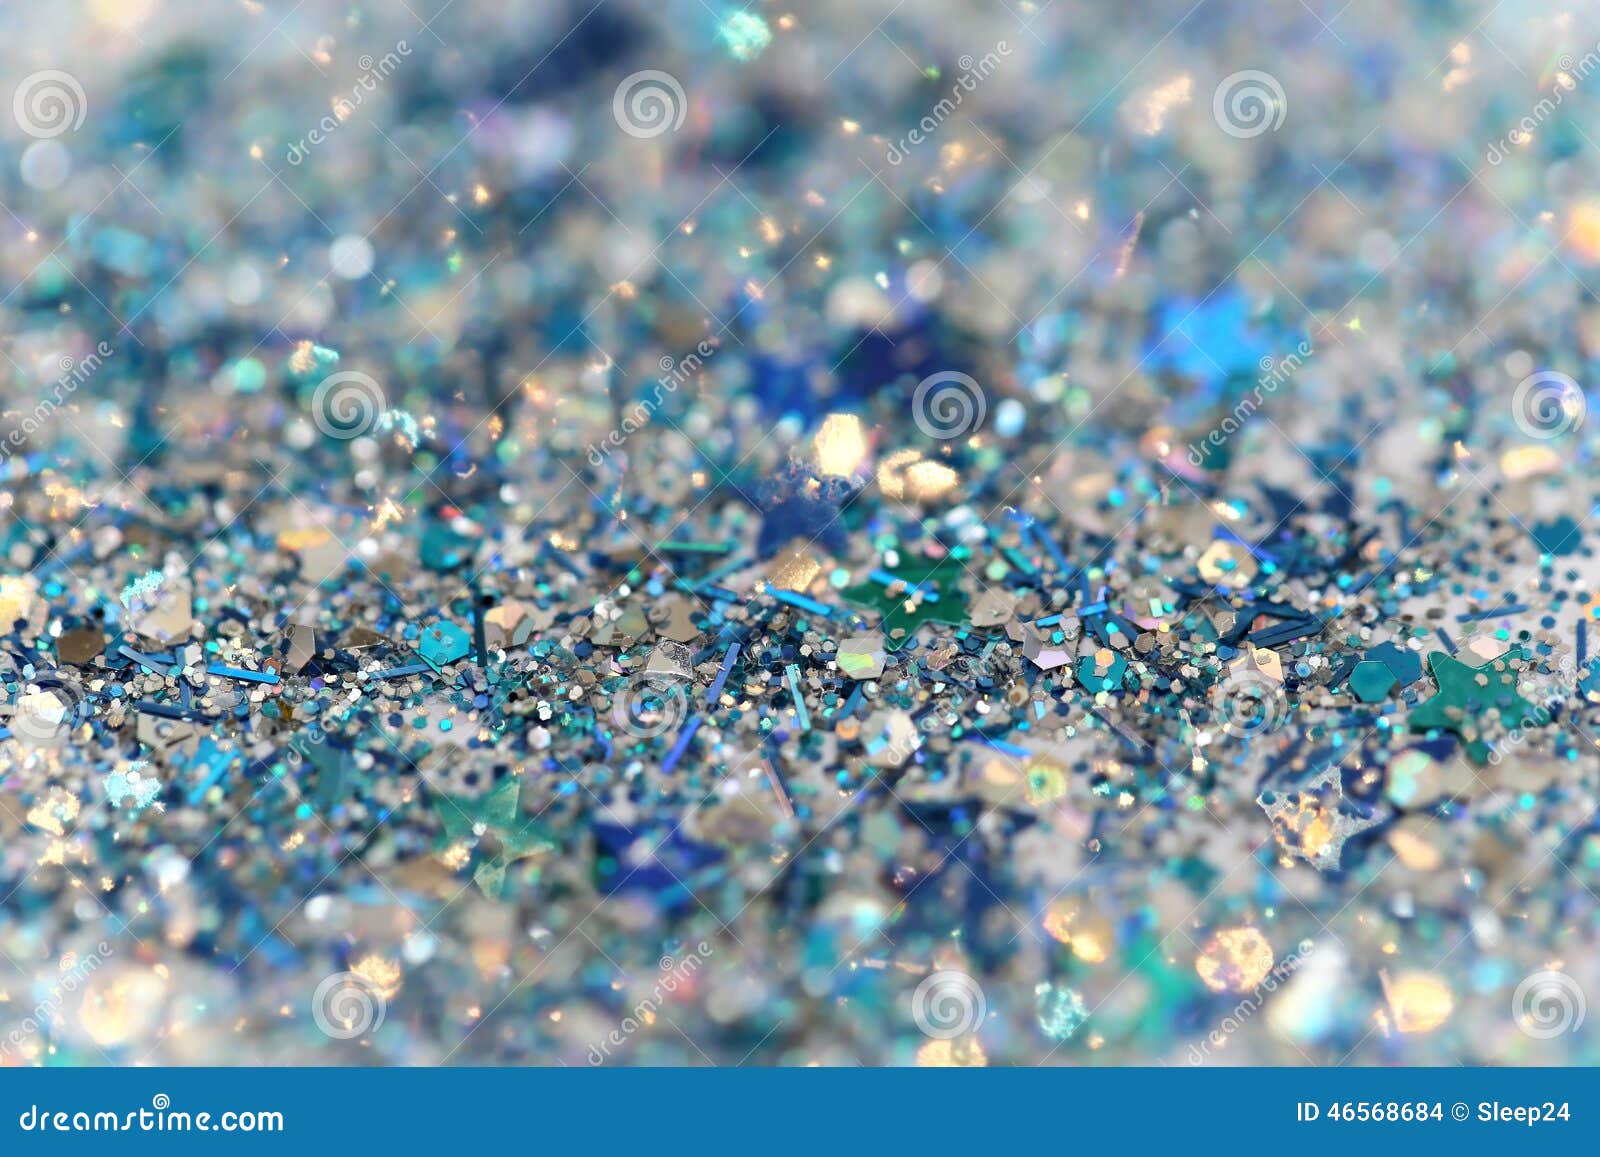 Blue and Silver Frozen Snow Winter Sparkling Stars Glitter Background.  Holiday, Christmas, New Year Abstract Texture Stock Photo - Image of  decoration, event: 46568684